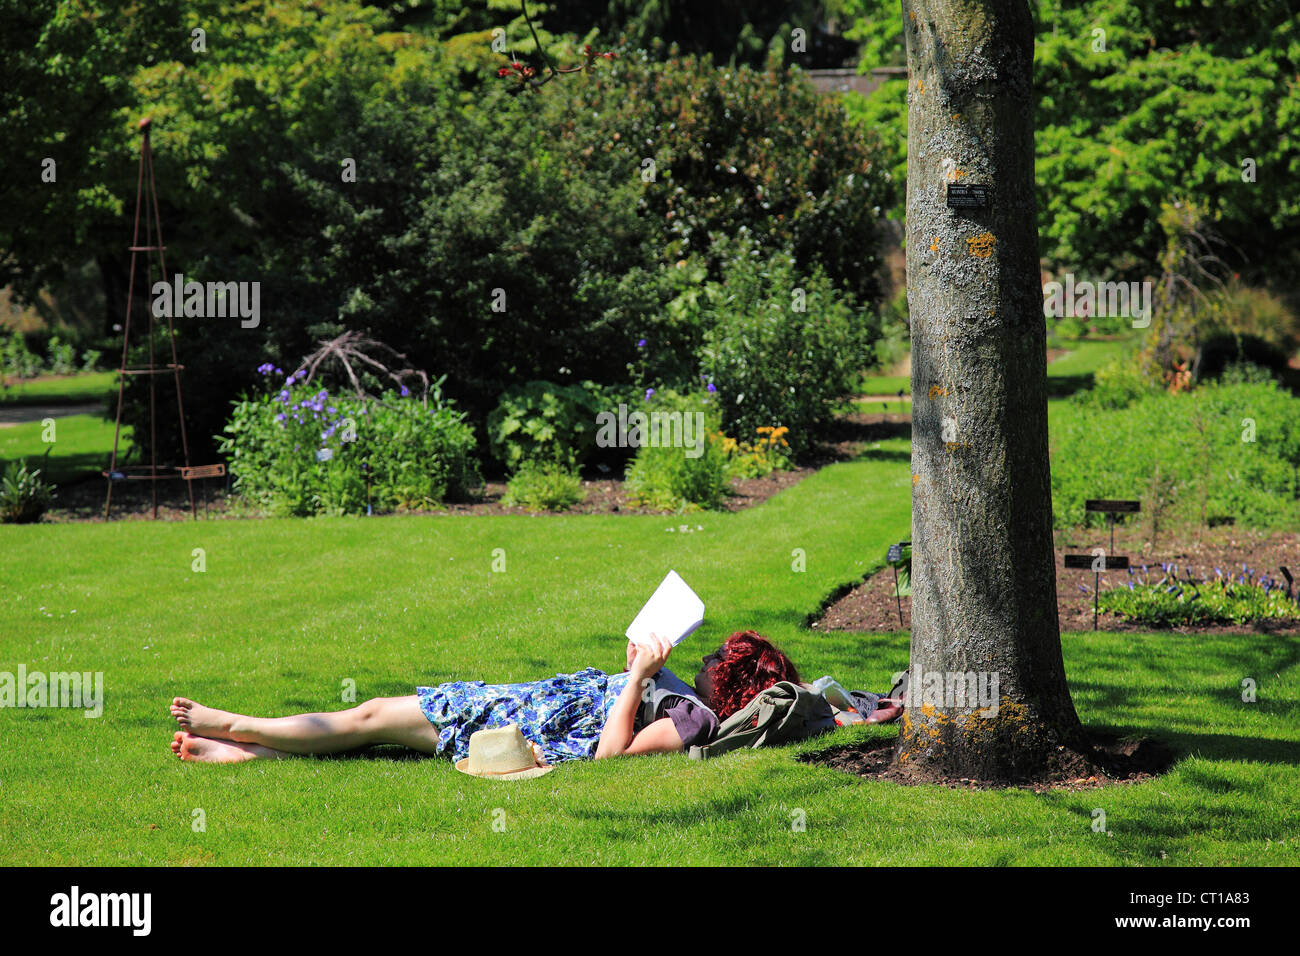 Student reading on the grass in Botanical Garden, Oxford, Oxfordshire, England Stock Photo